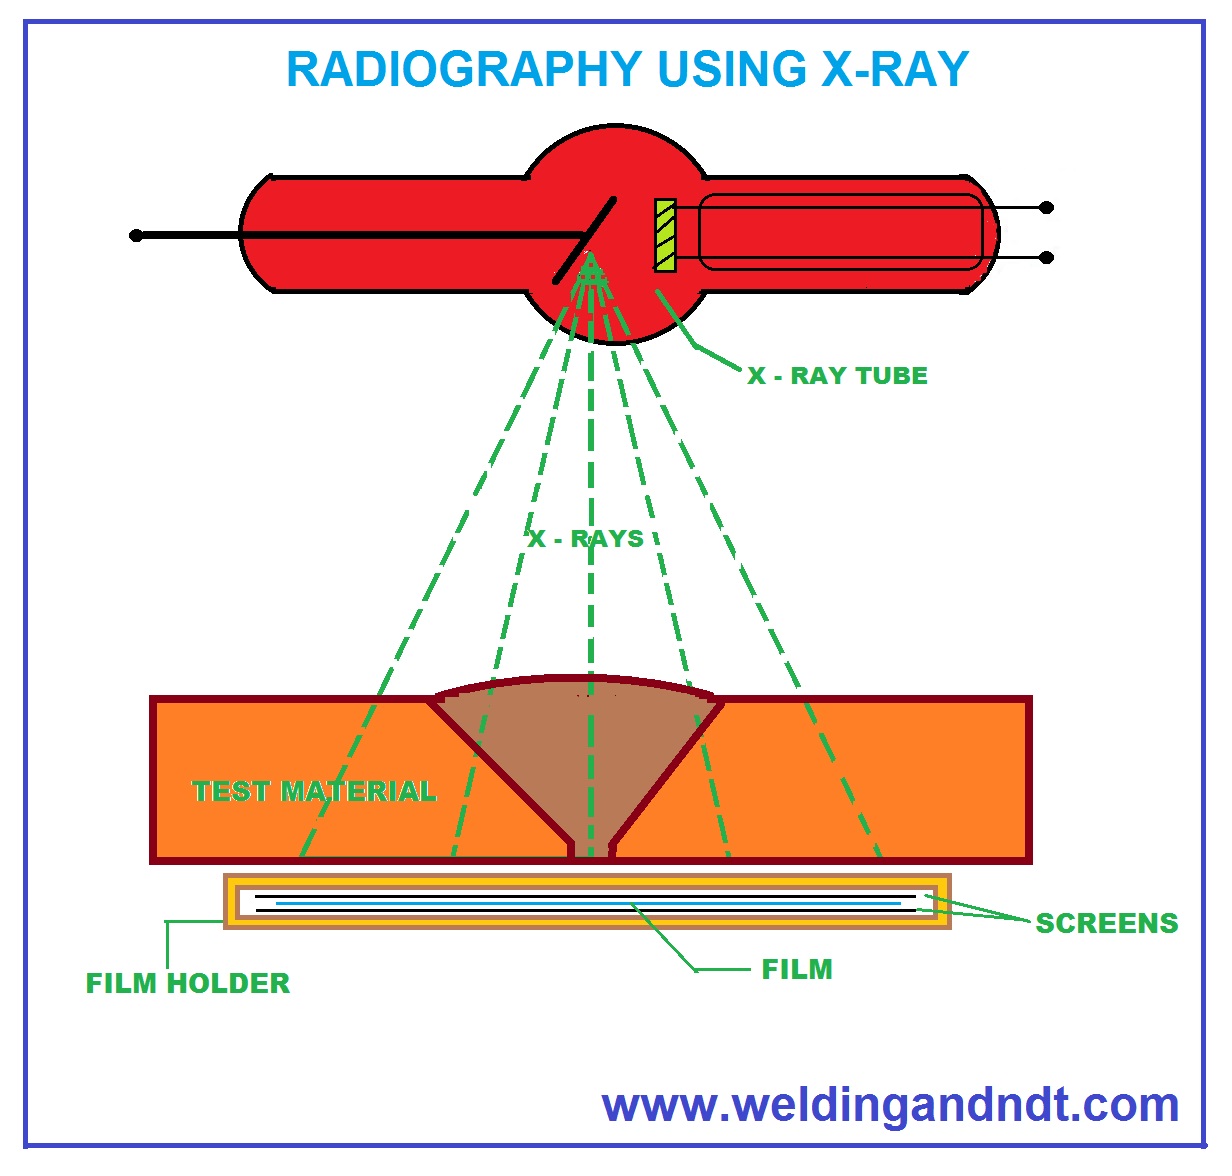 X-Ray Radiography technique